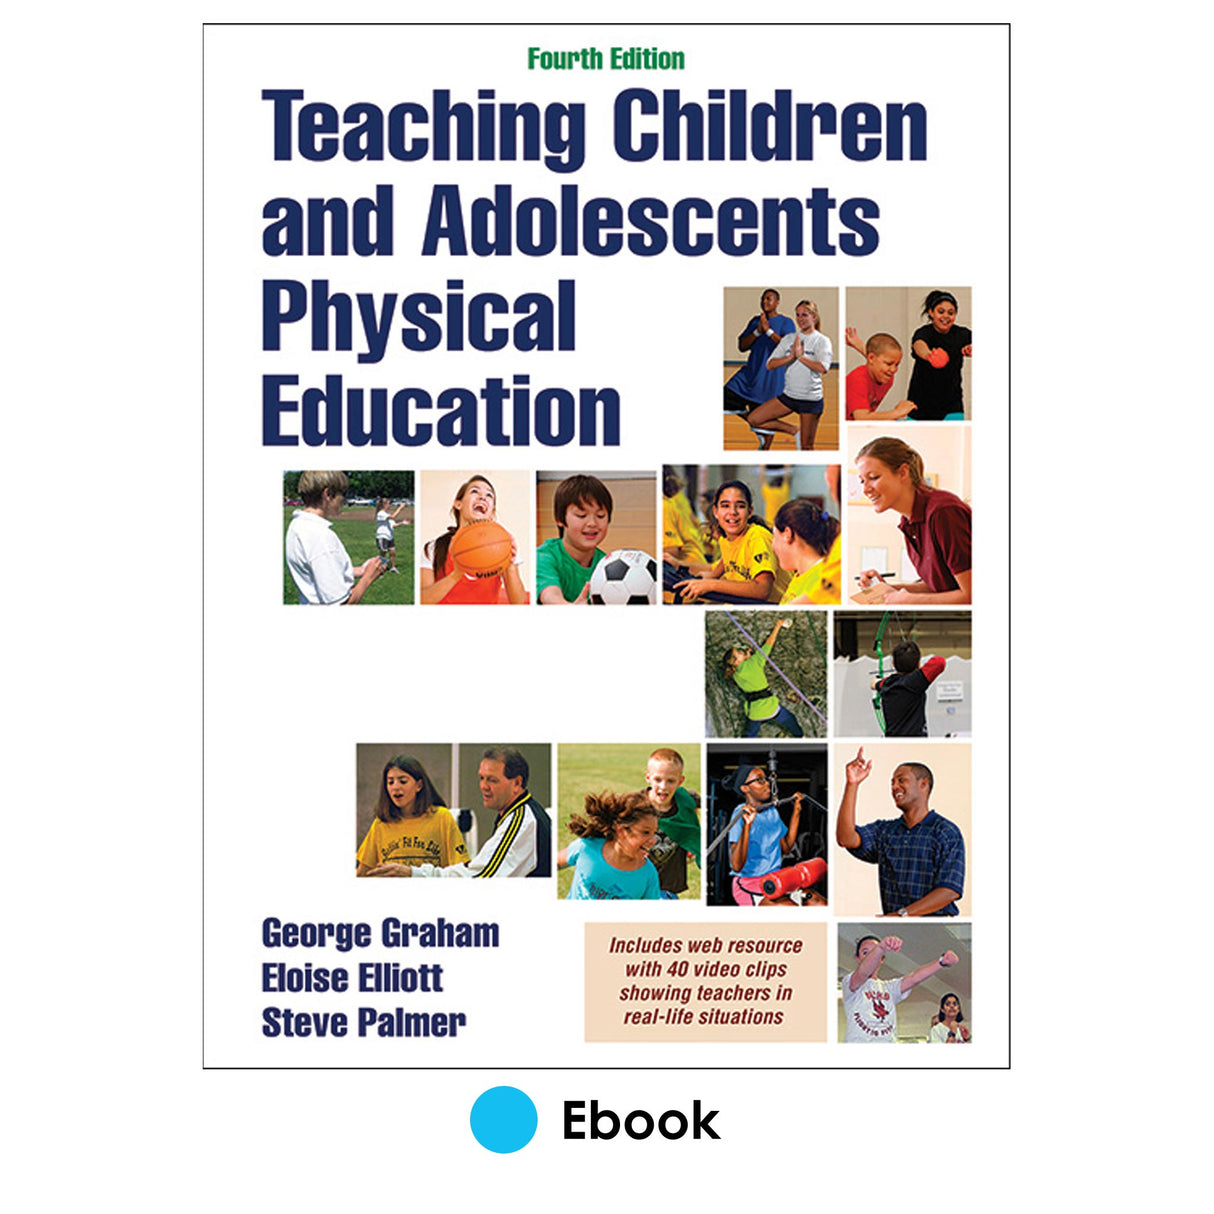 Teaching Children and Adolescents Physical Education 4th Edition PDF With Web Resource